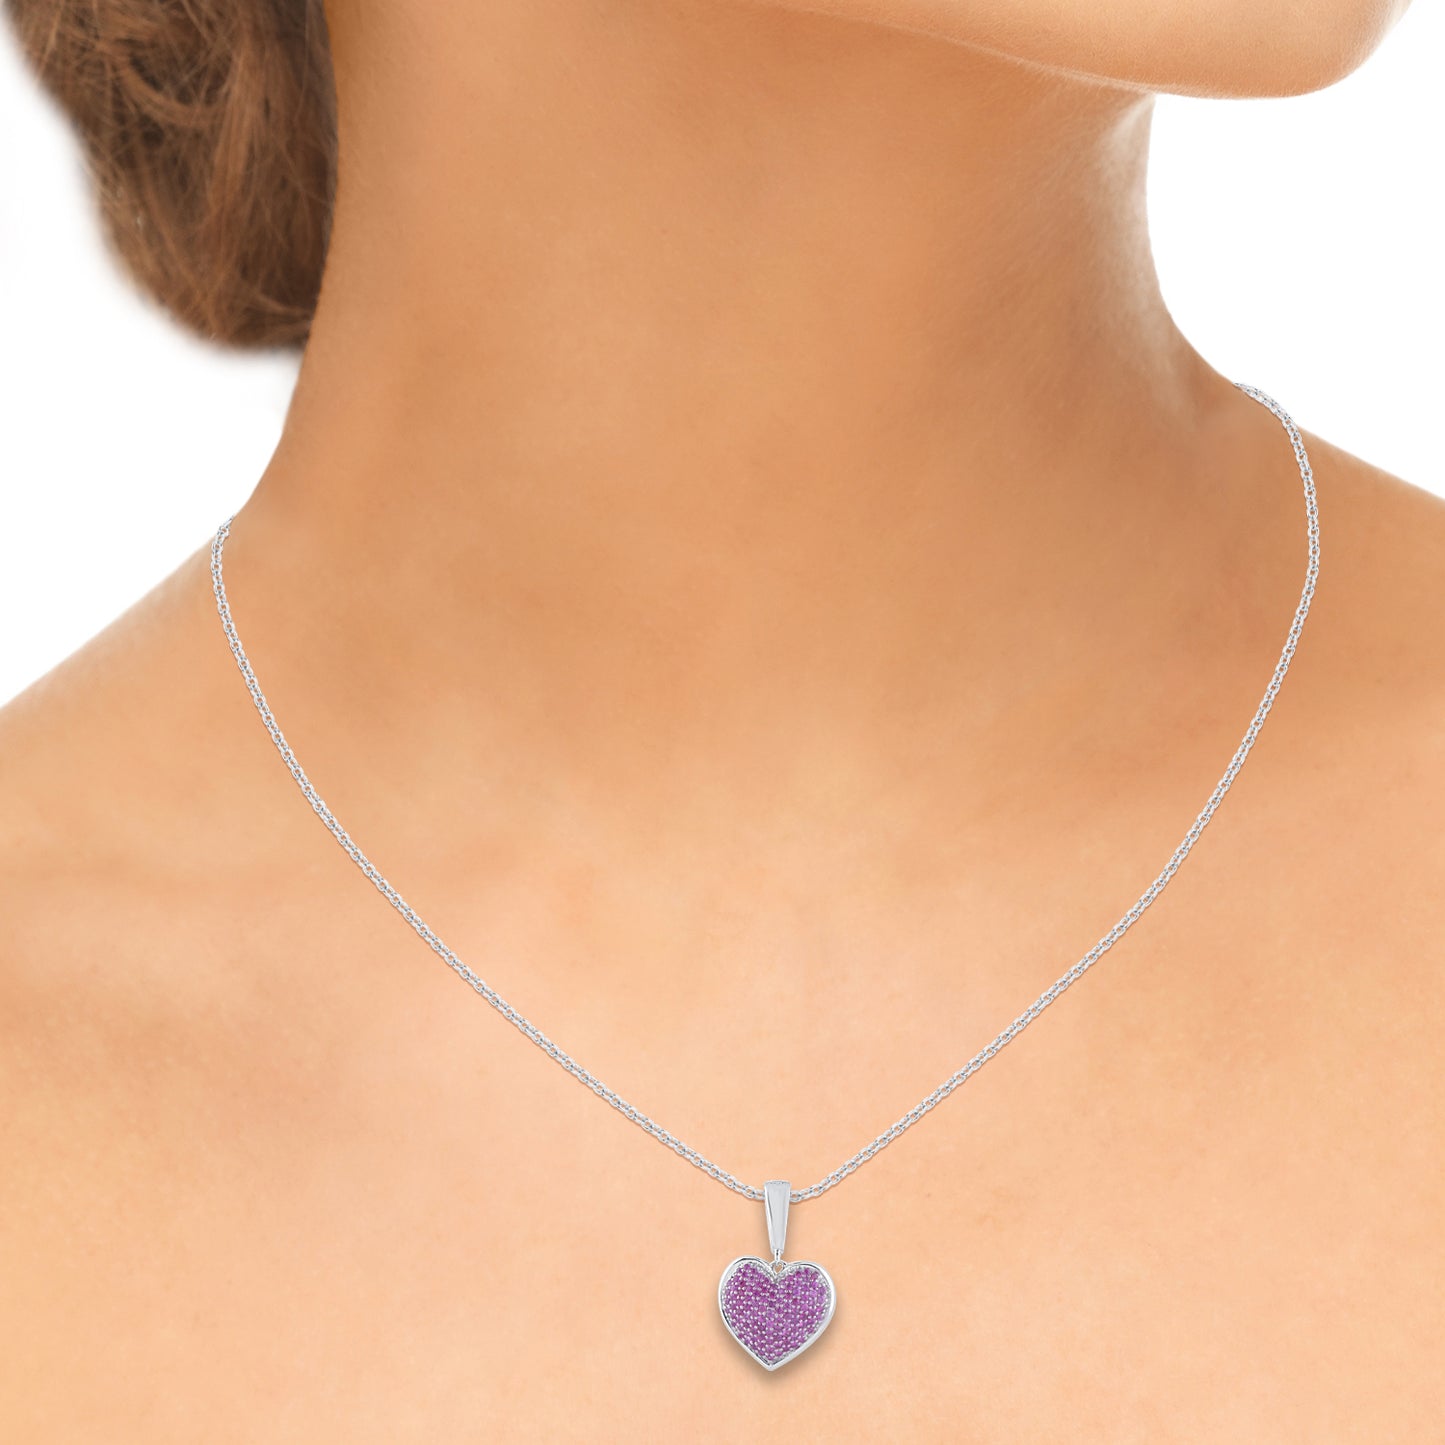 Pink Sapphire Heart Pendant Necklace in 925 Sterling Silver